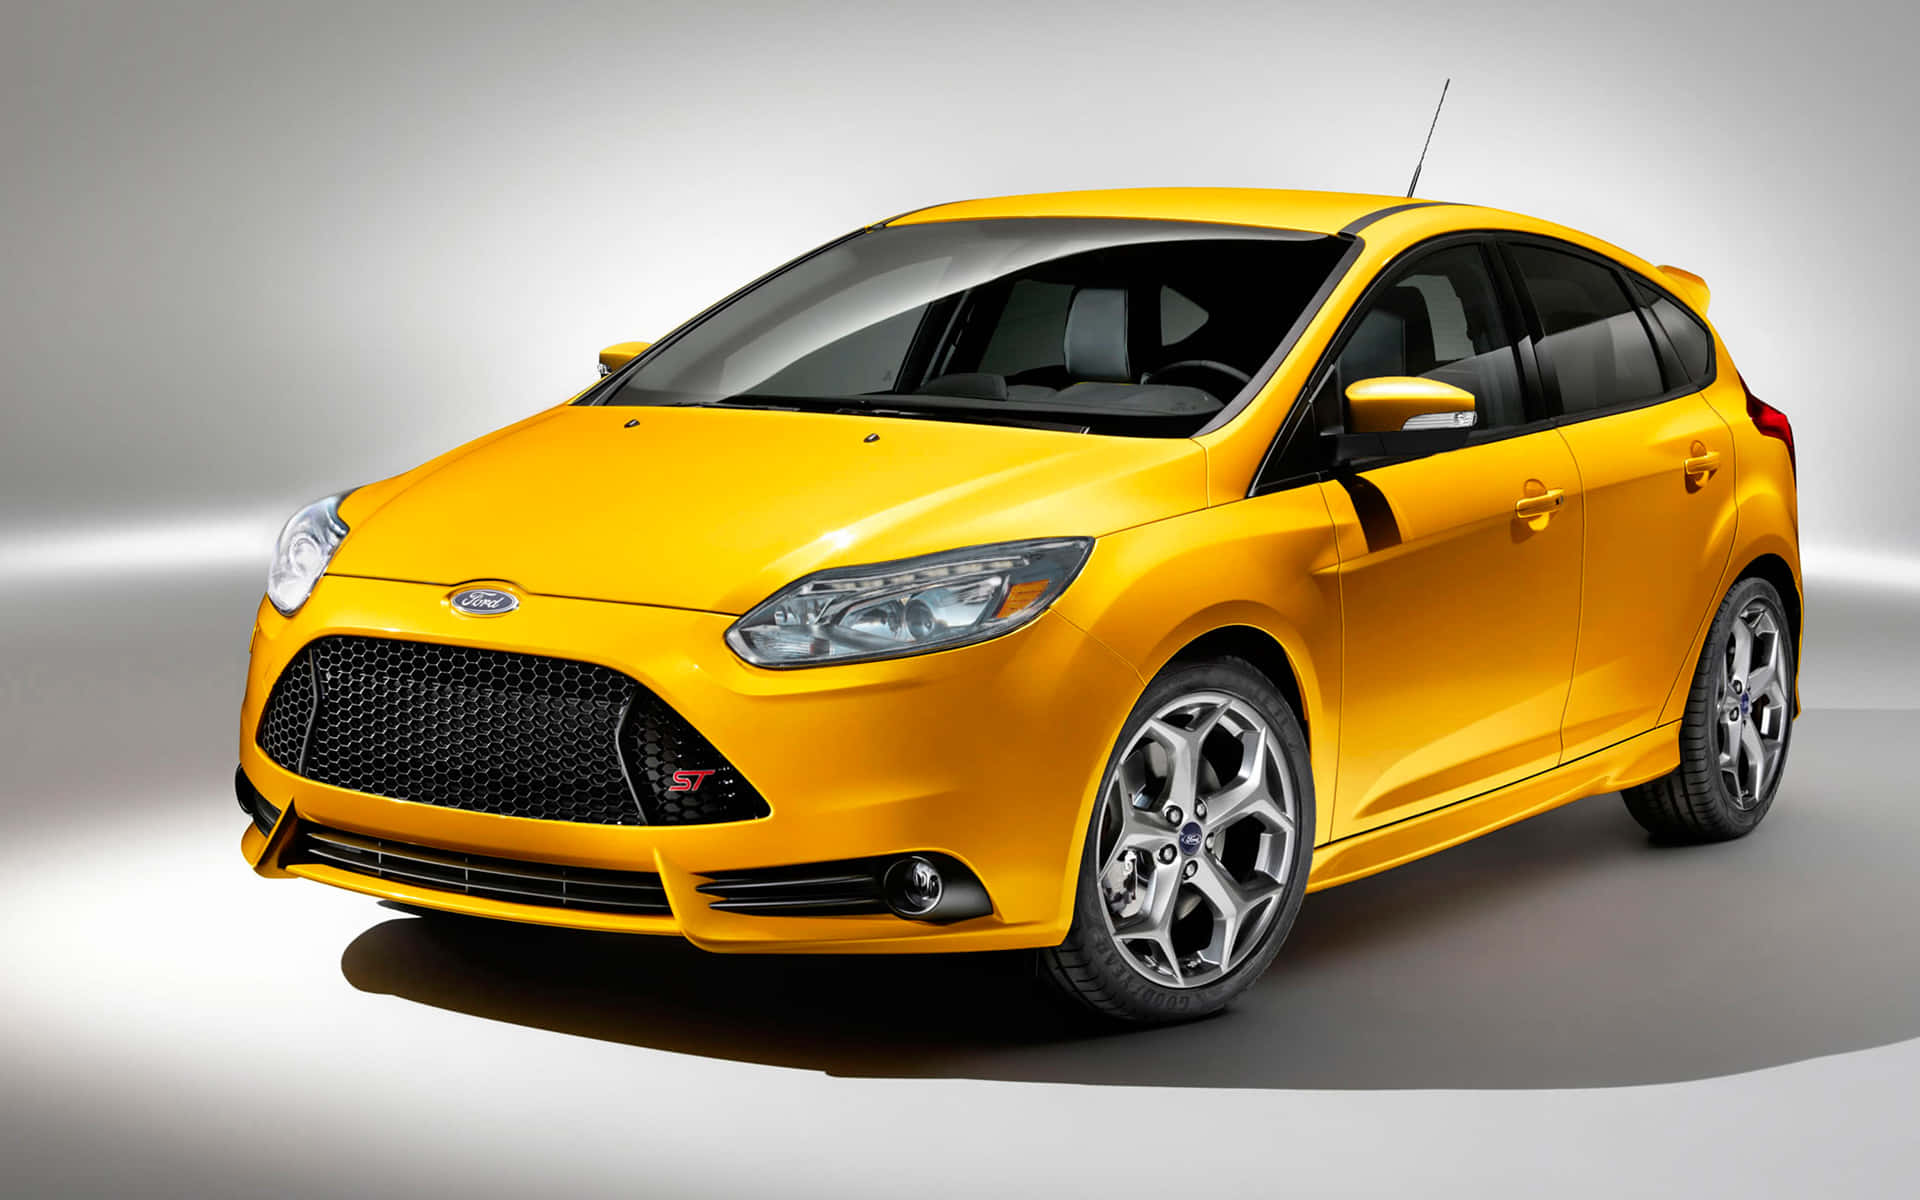 Stylish Ford Focus on the Road= Wallpaper